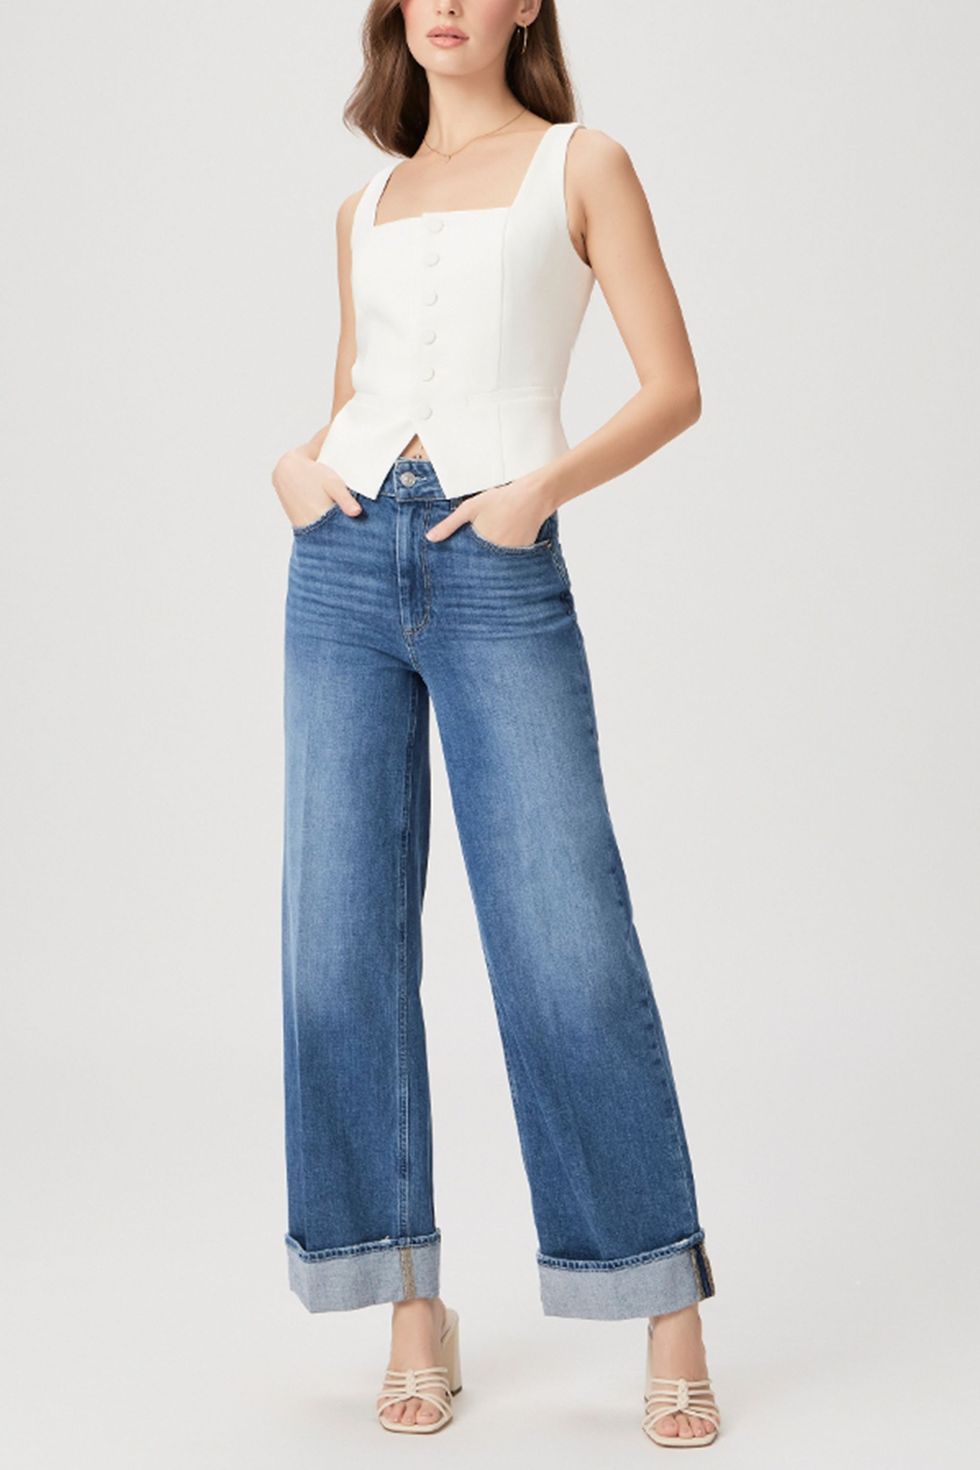 Breathe Easy Because High-Waisted Jeans Are on the Rise